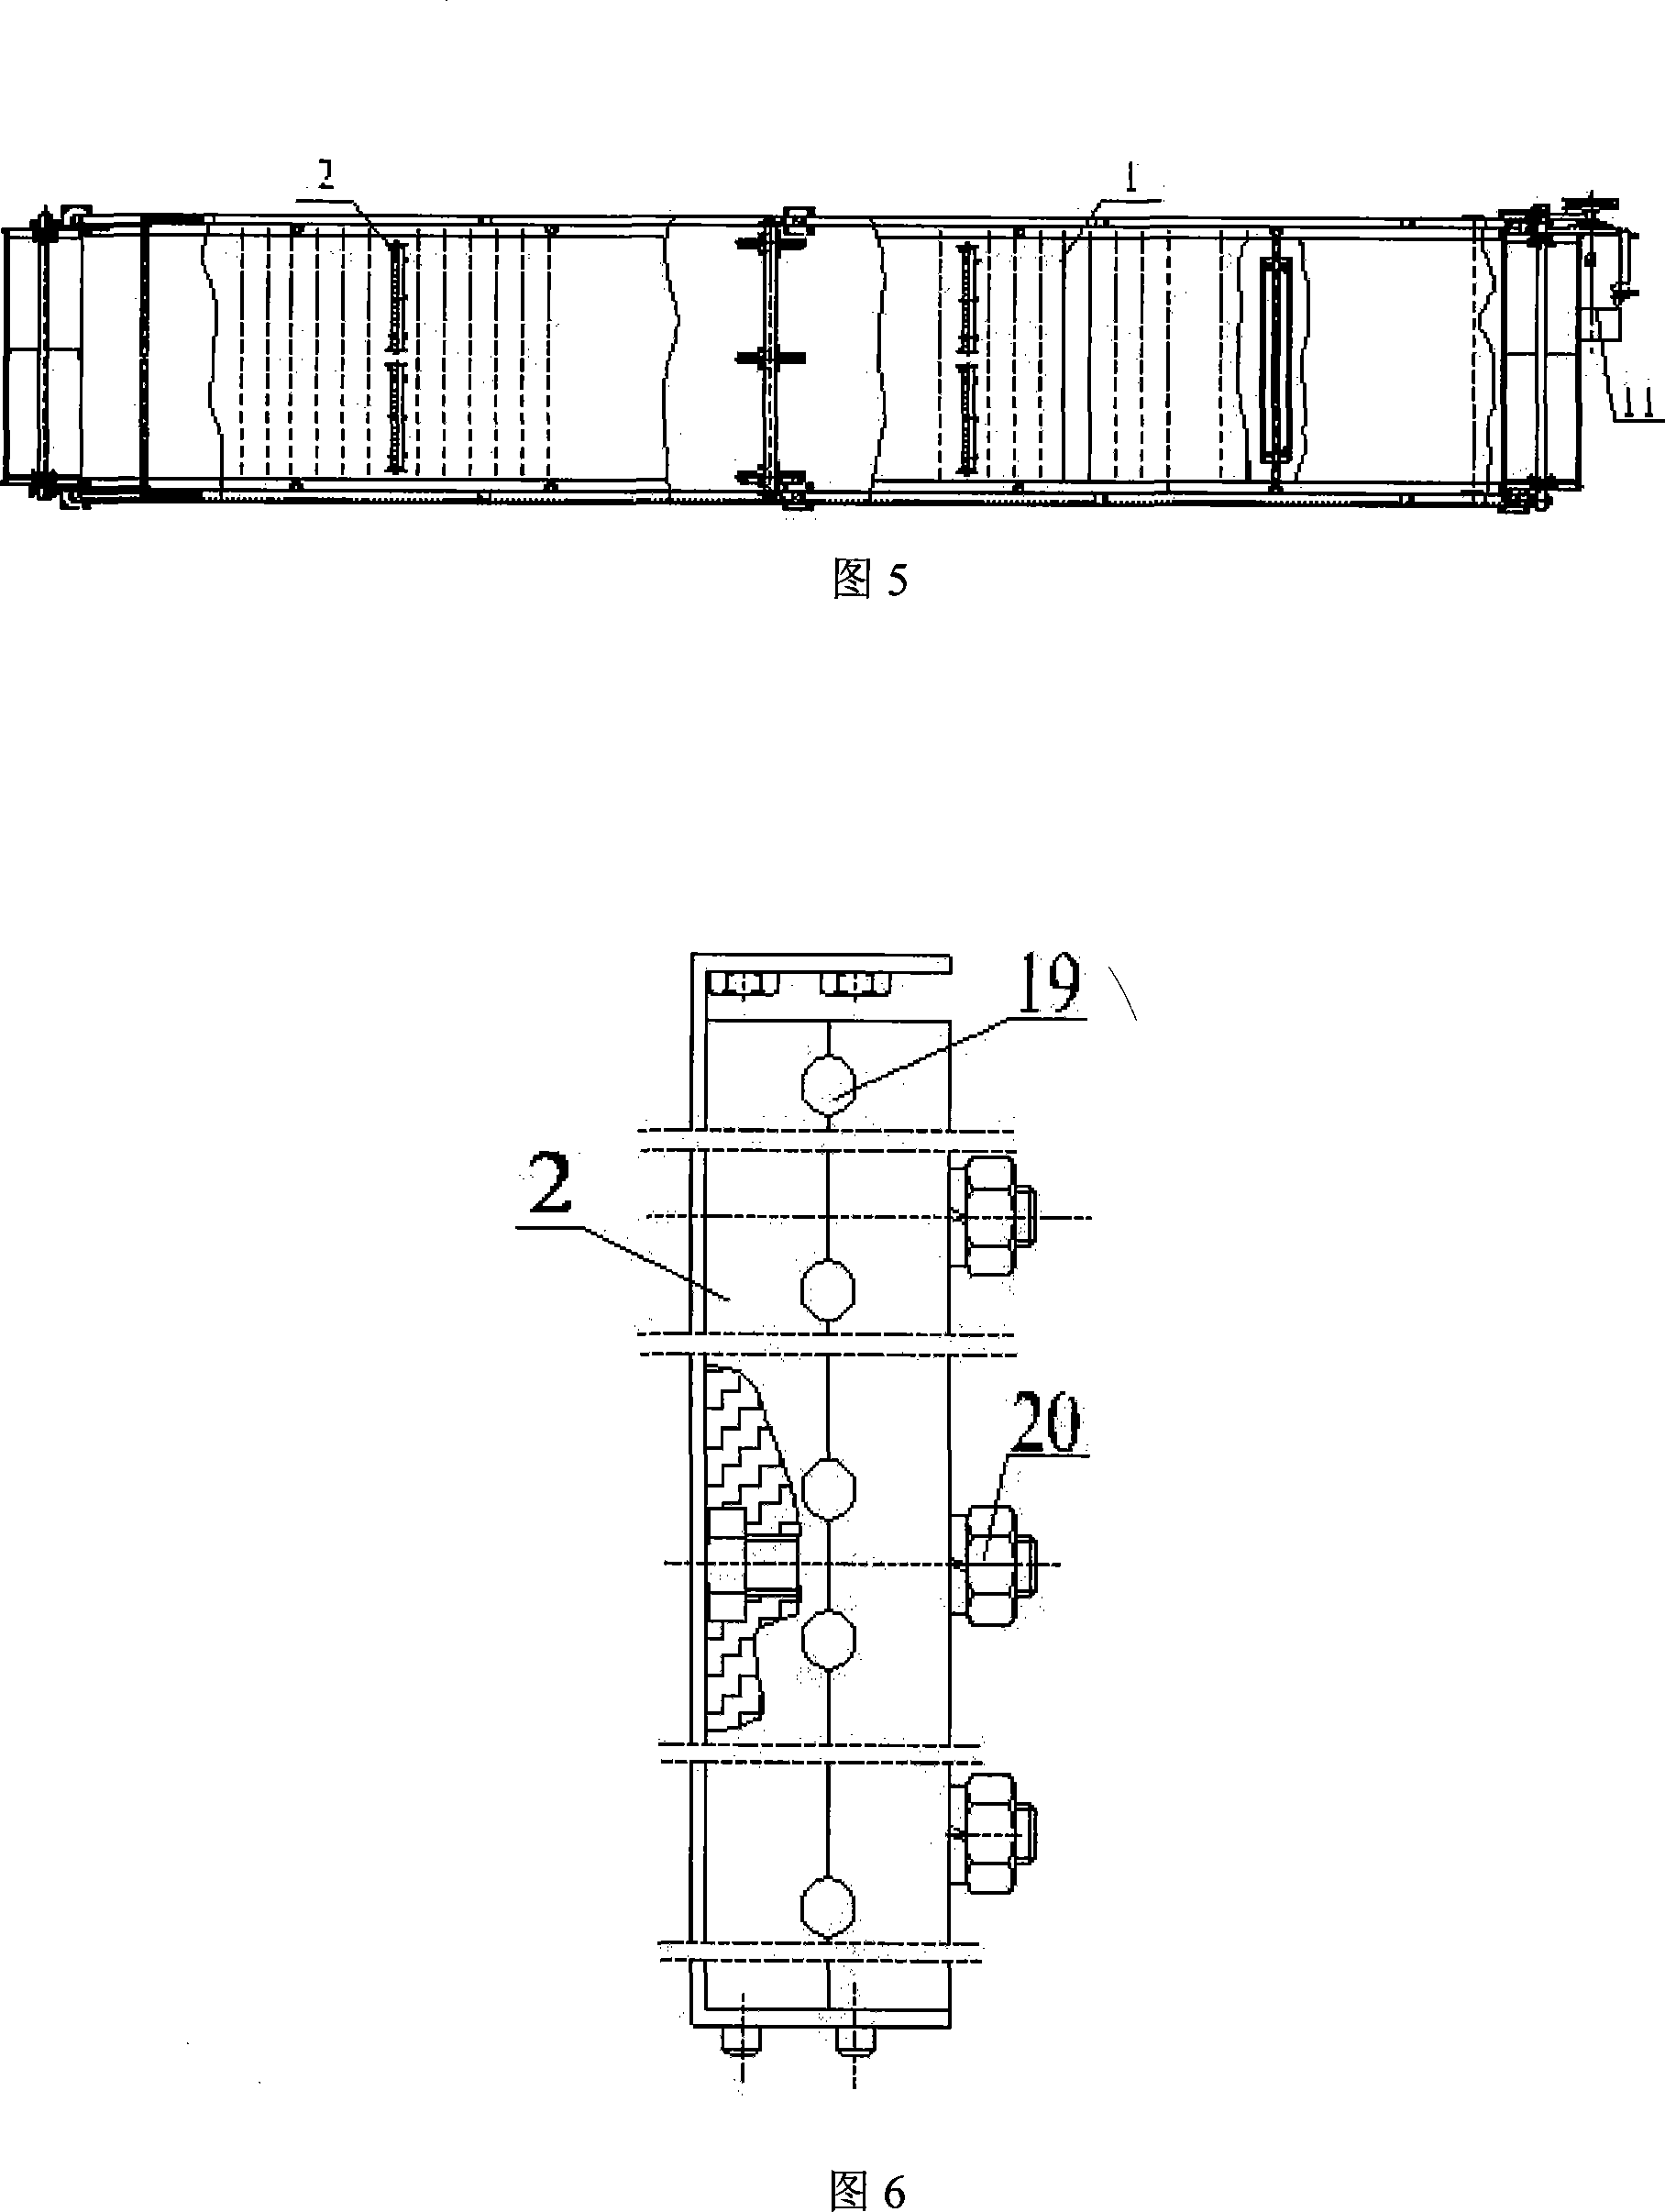 Stalk cutting test device and method